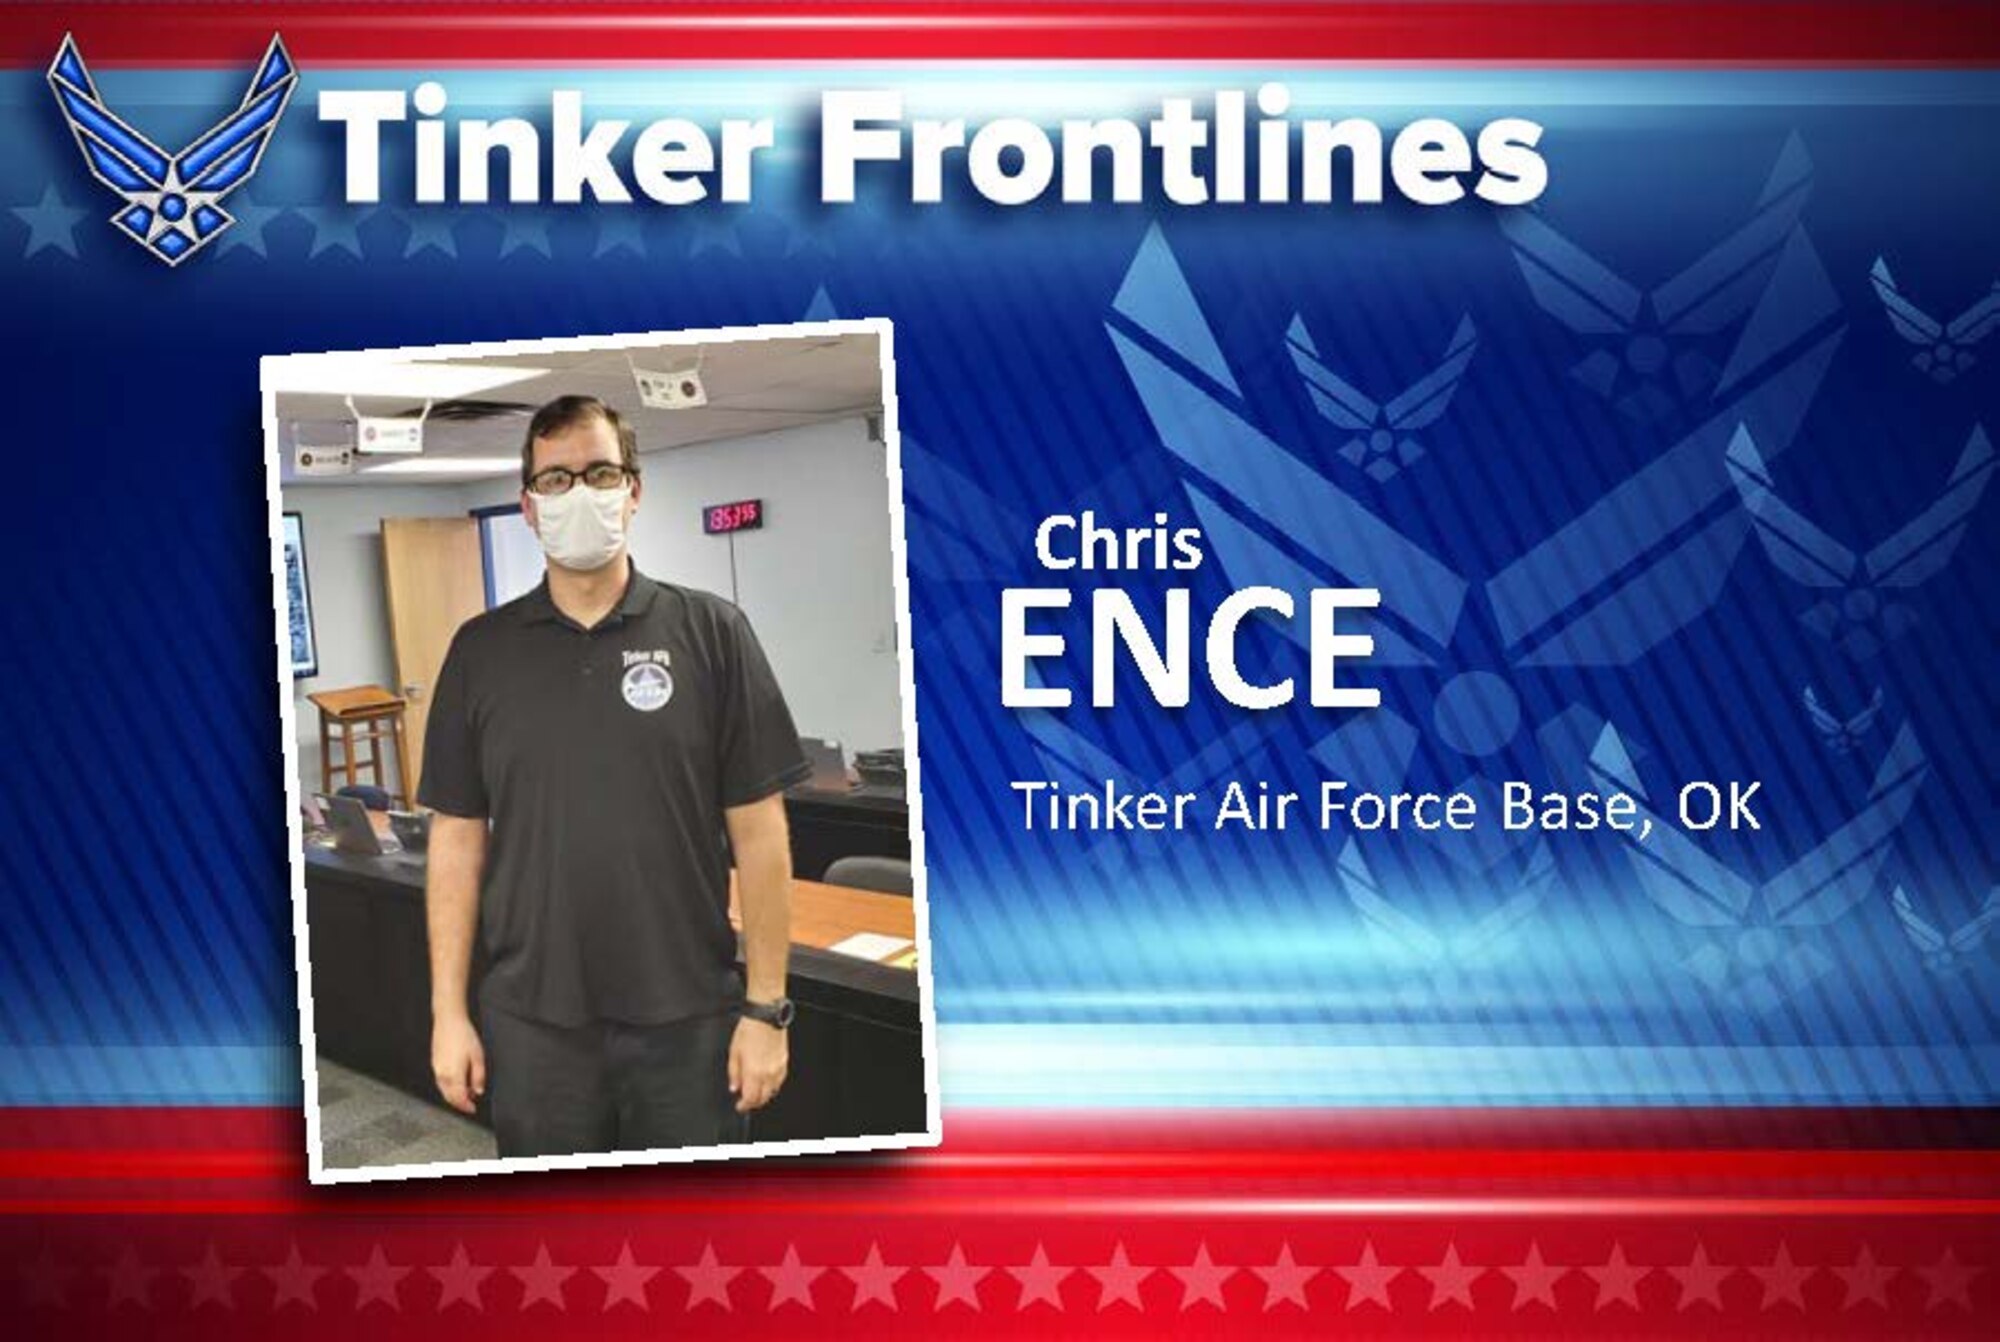 Chris Ence is an emergency management specialist with the 72nd Civil Engineering Directorate.